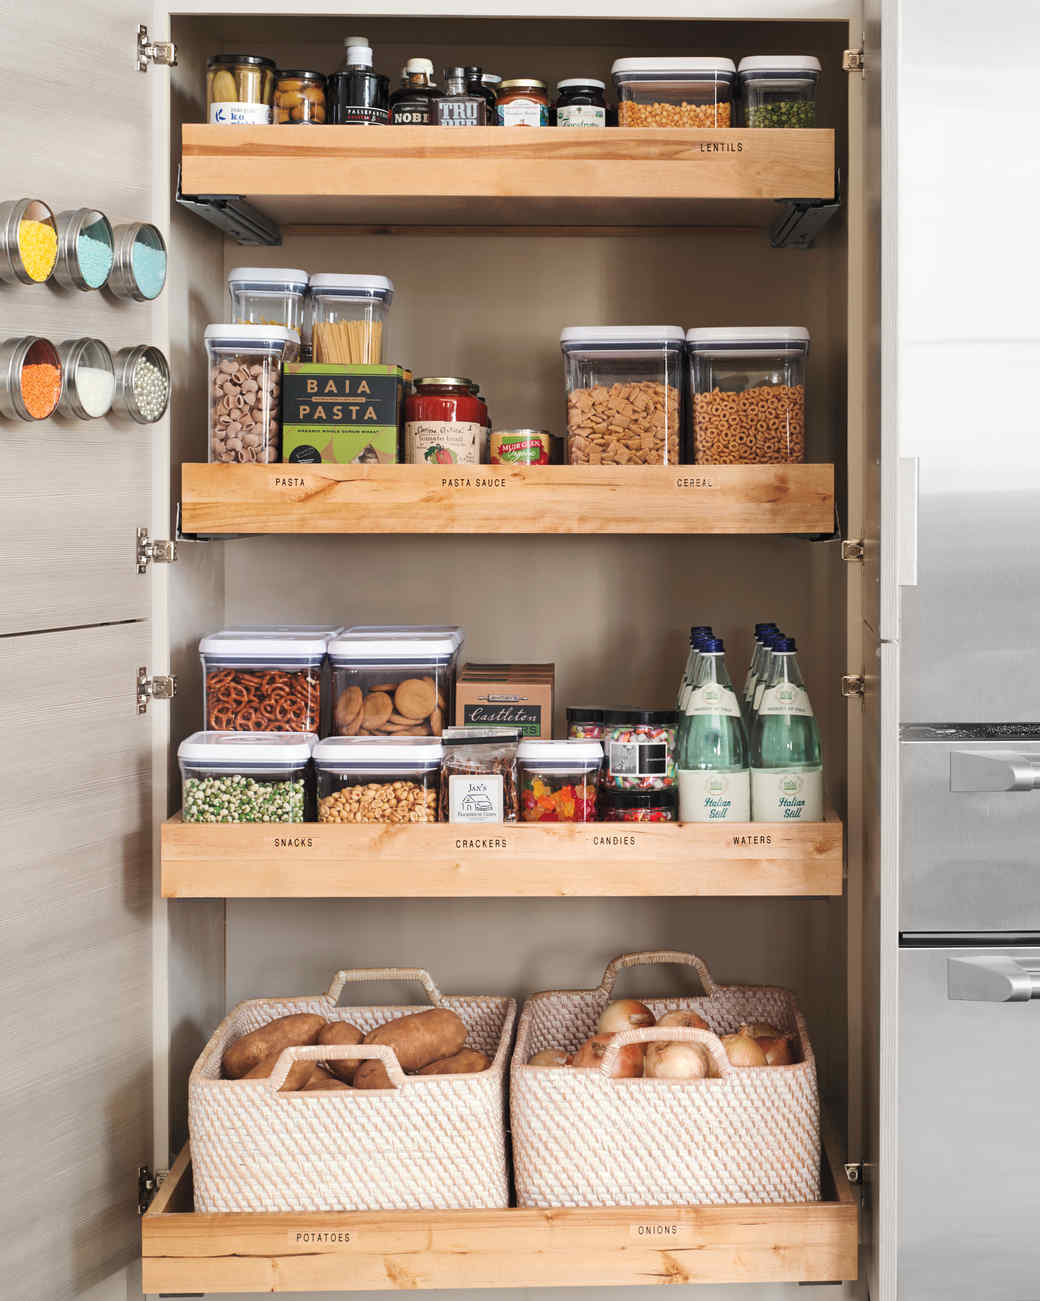 Find some storage pantry shelving for
  your kitchen